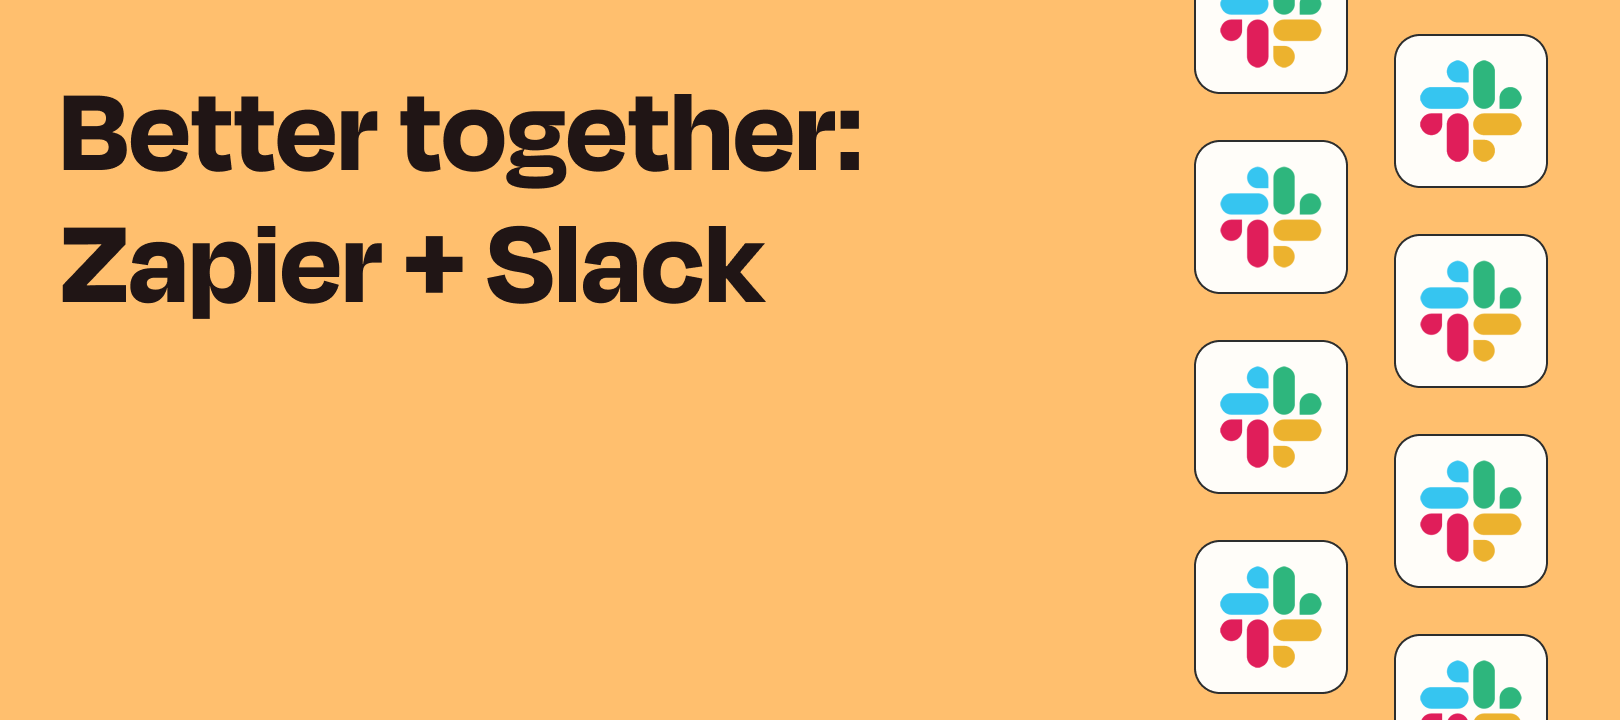 5 ways that Slack and Zapier are better together